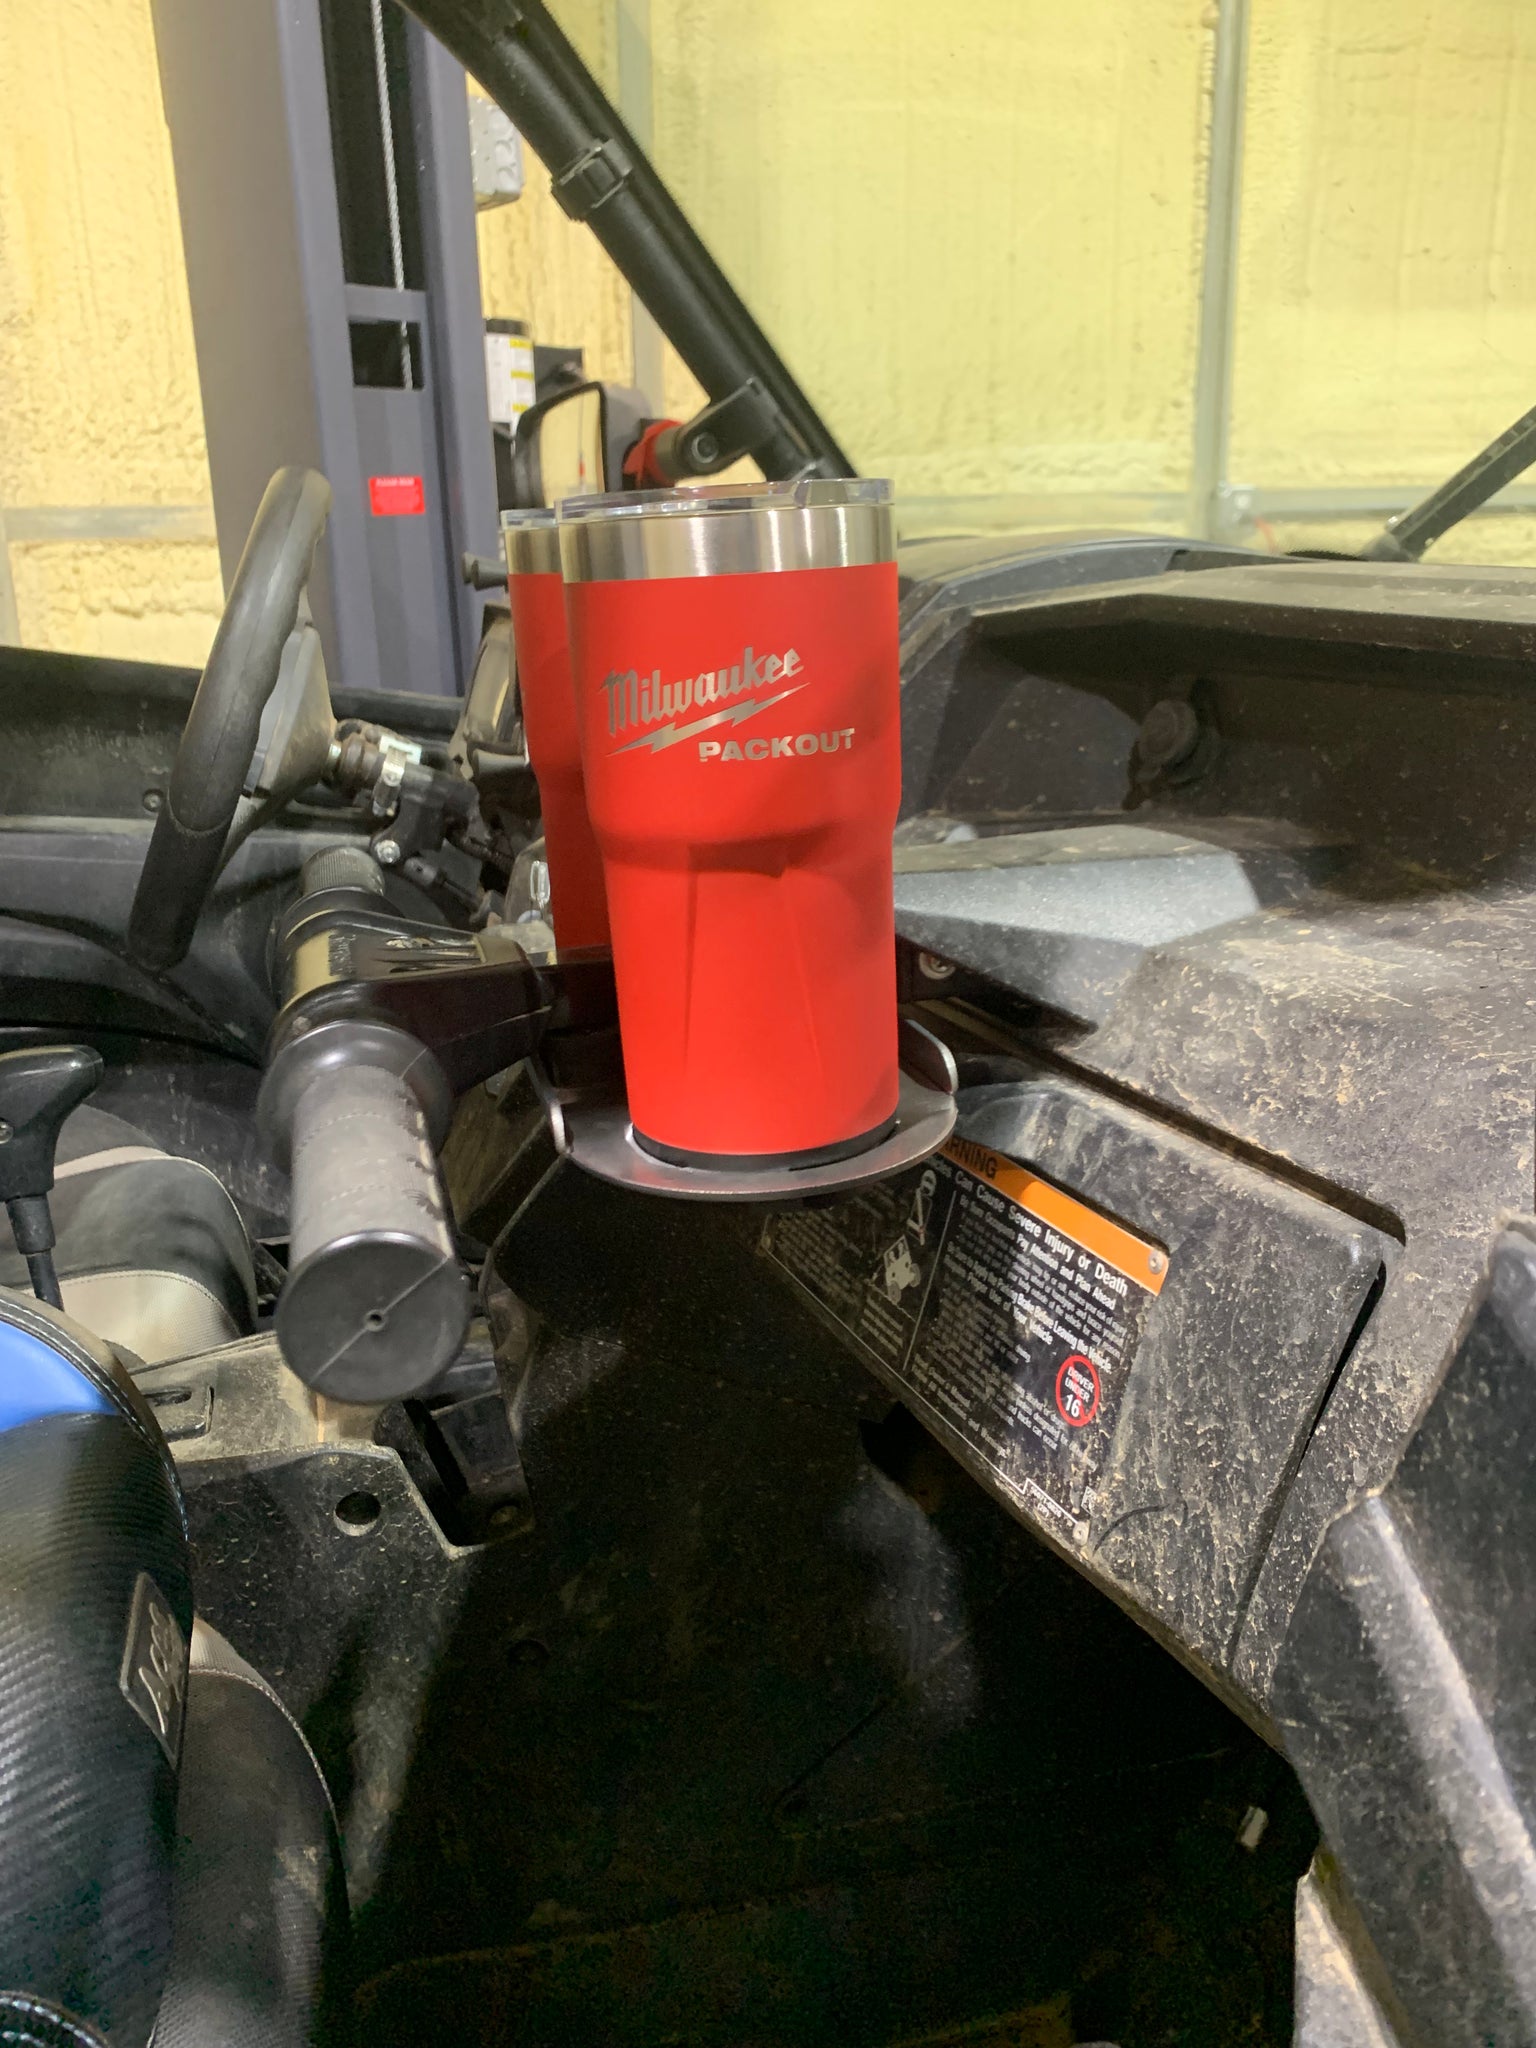 StealthMounts Cup Holder for The Milwaukee PACKOUT Tumbler - MW-PAC-CUP-1